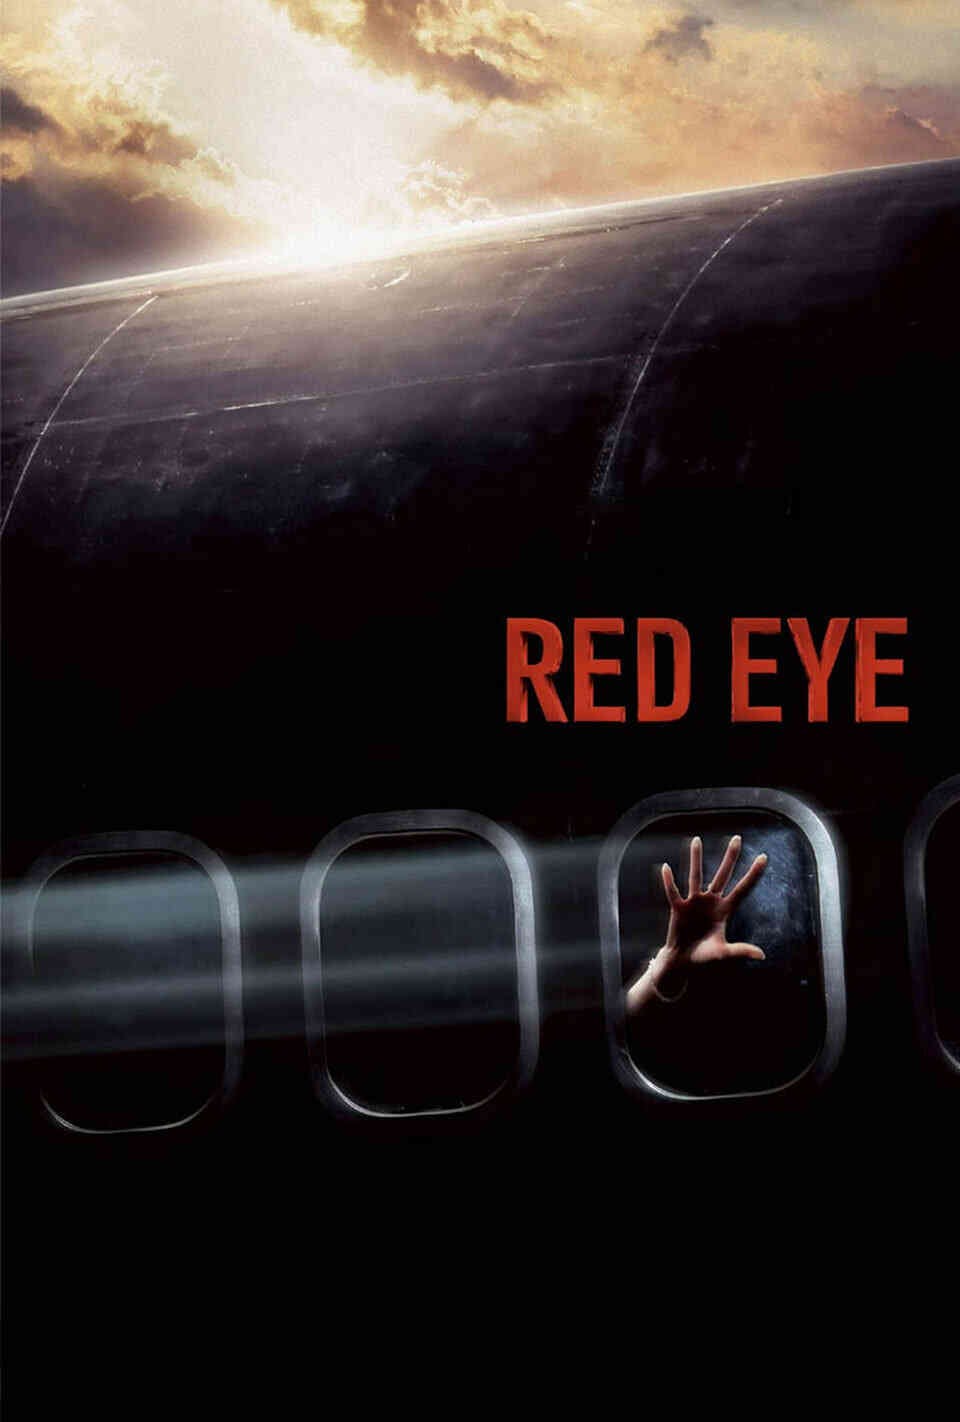 Read Red Eye screenplay (poster)